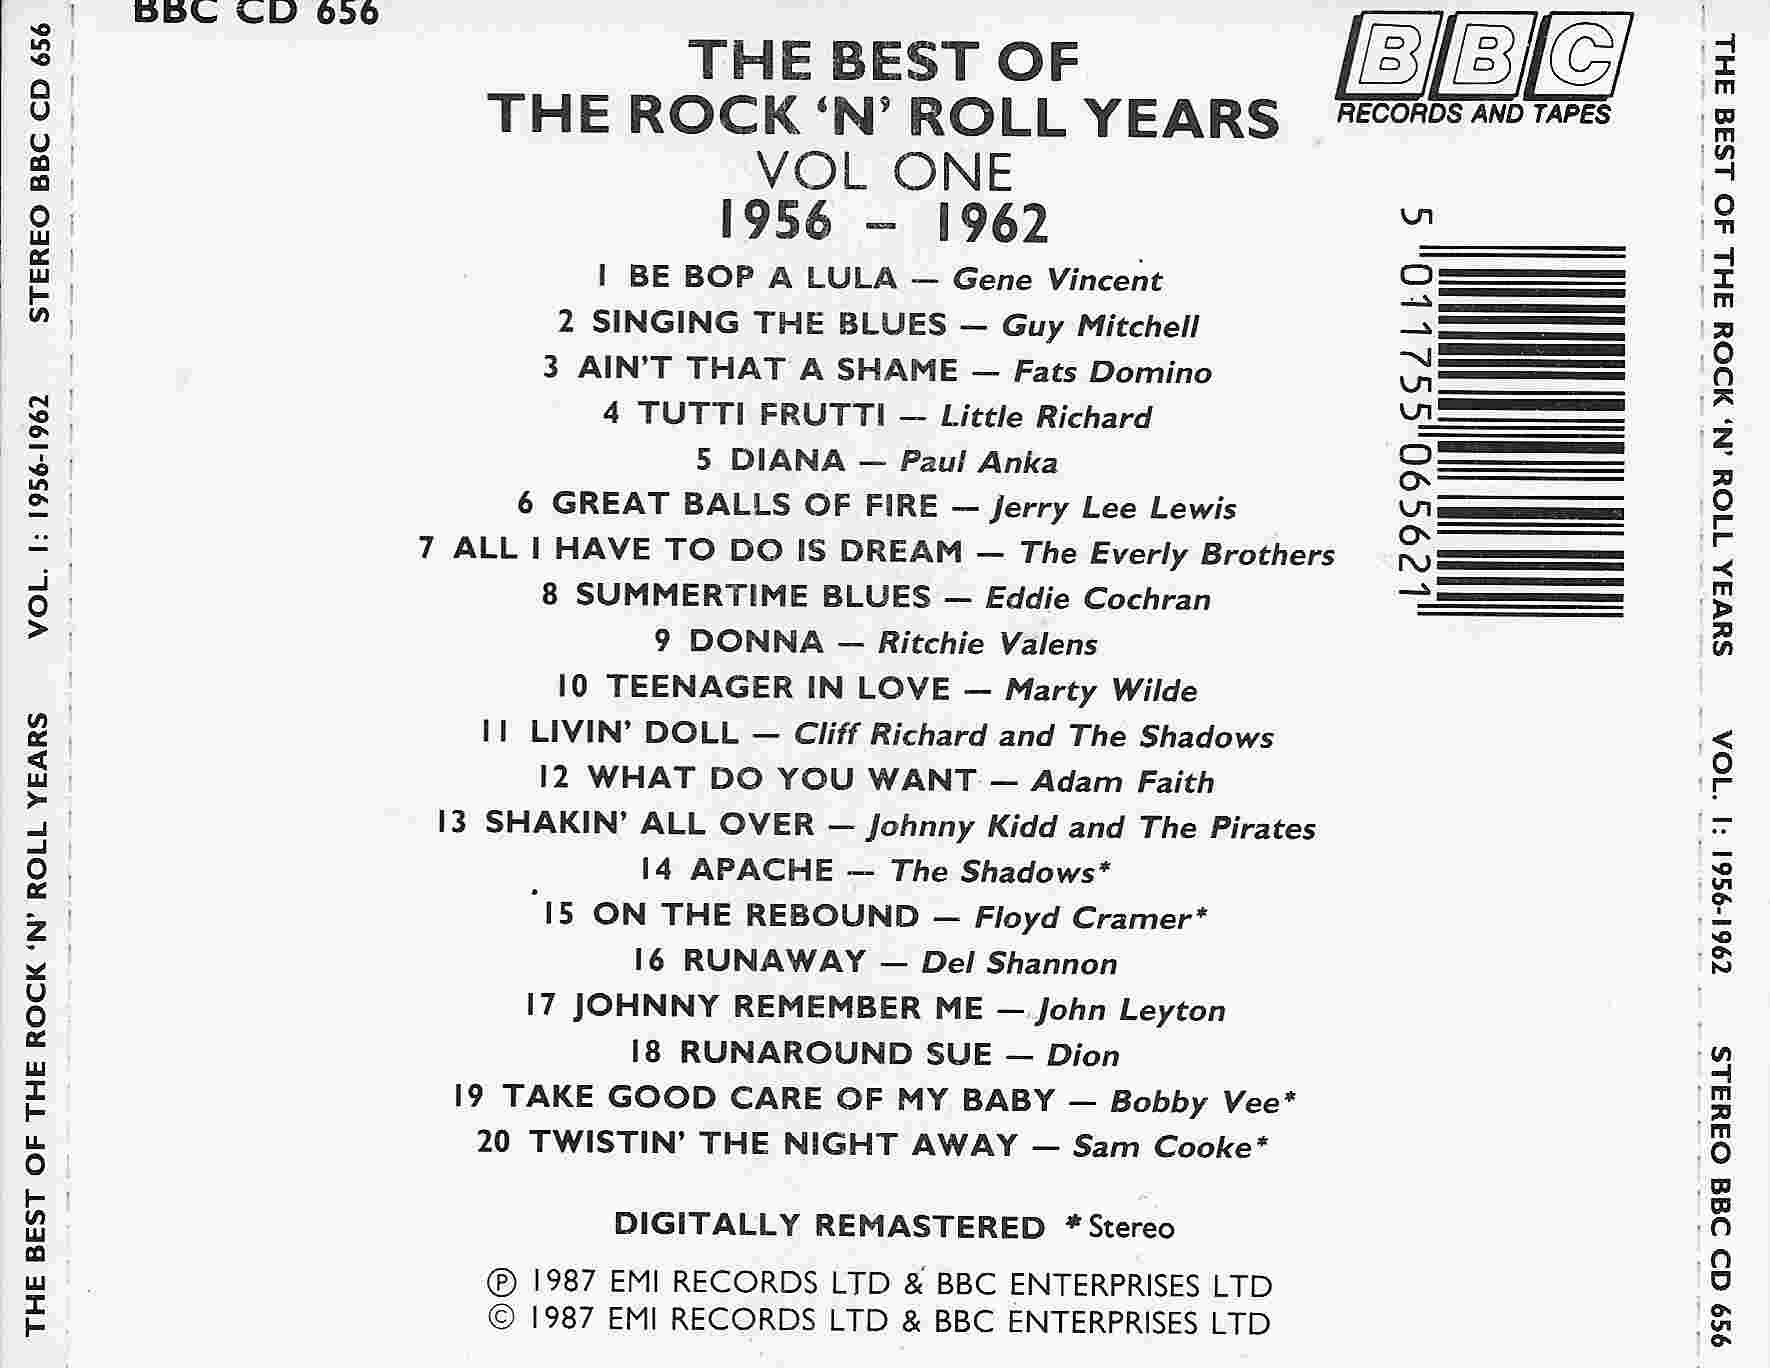 Picture of BBCCD656 The best of the rock 'n' roll years 1956 - 1963 by artist Various from the BBC records and Tapes library